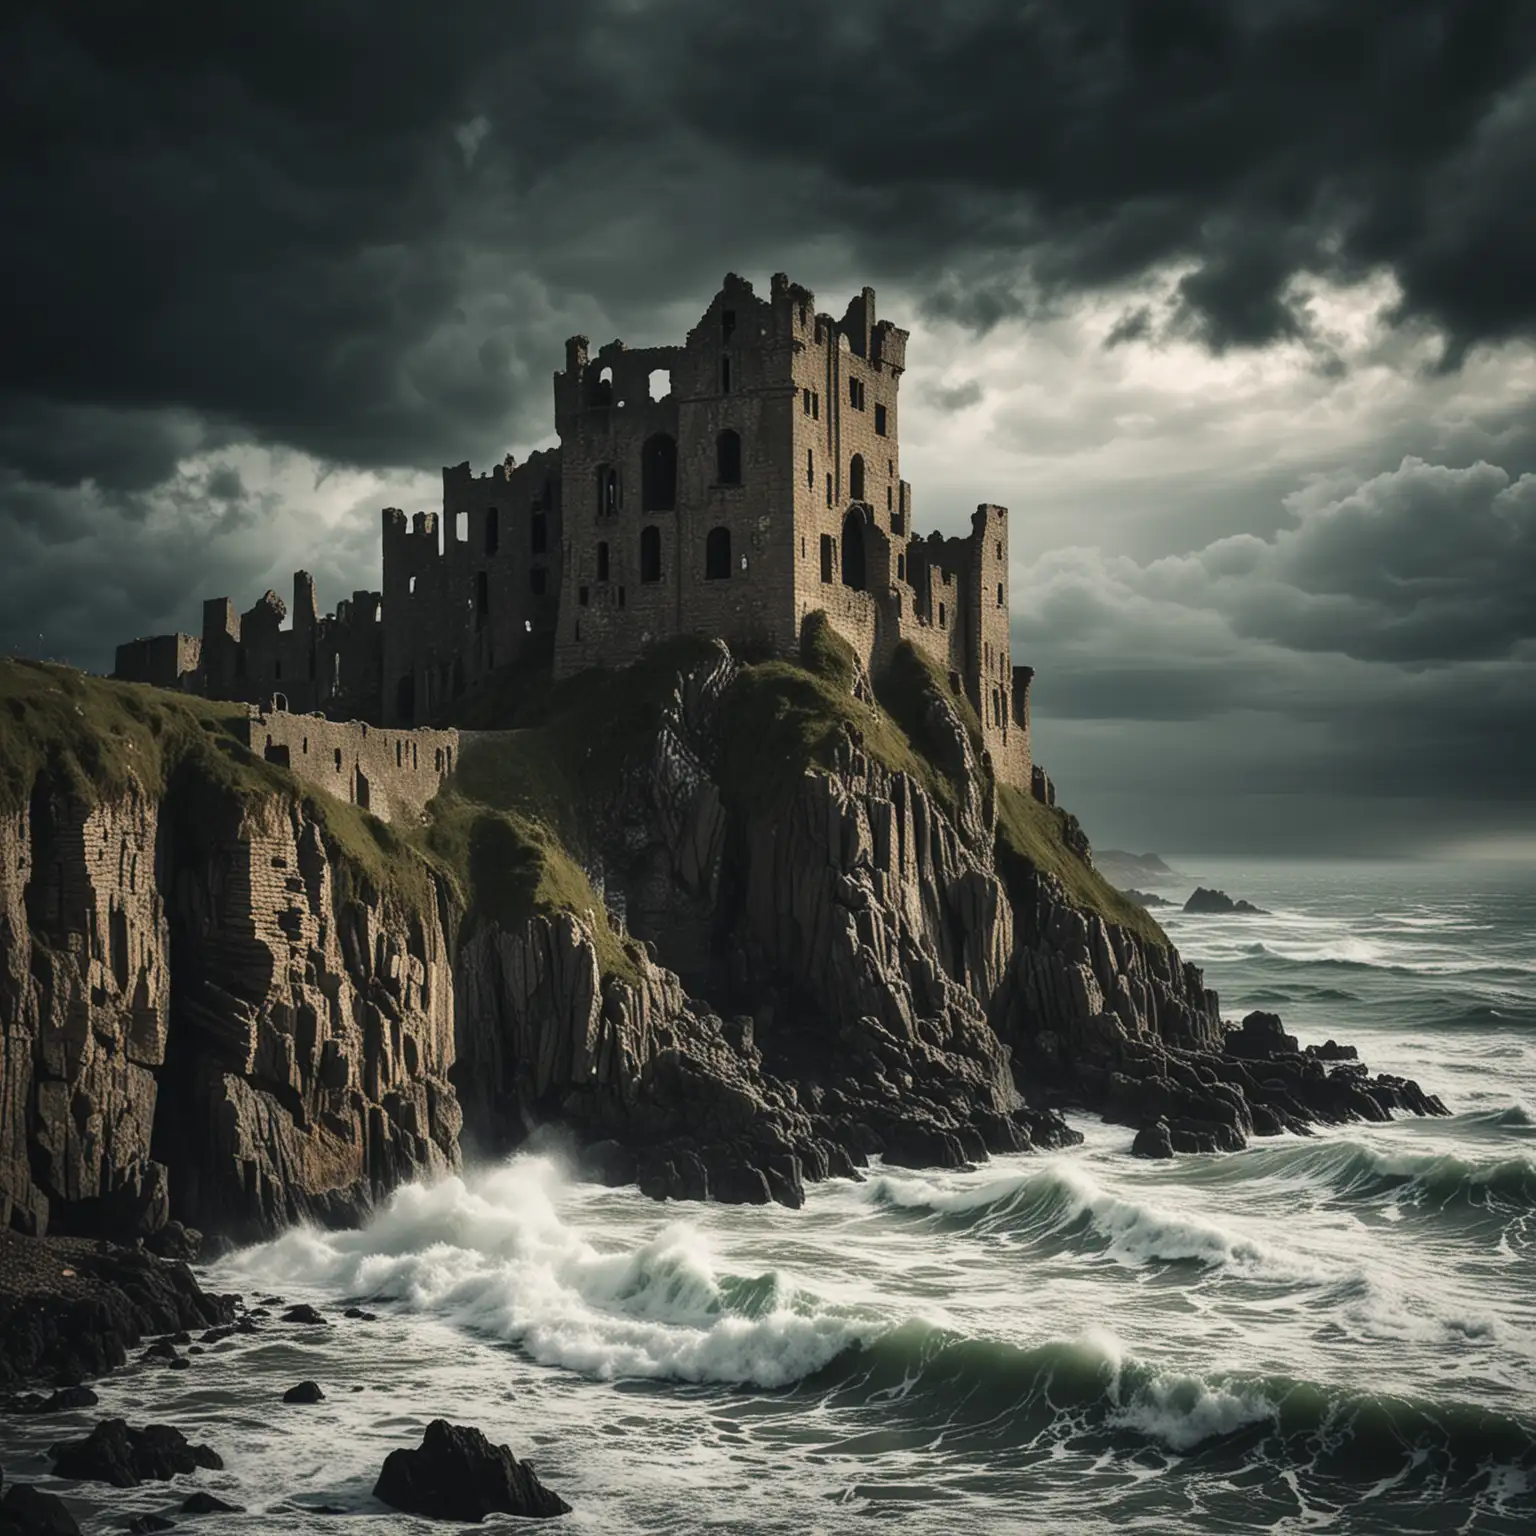 Ruined castle on a cliff overlooking the sea, with a stormy sky and crashing waves, eerie, moody, atmospheric